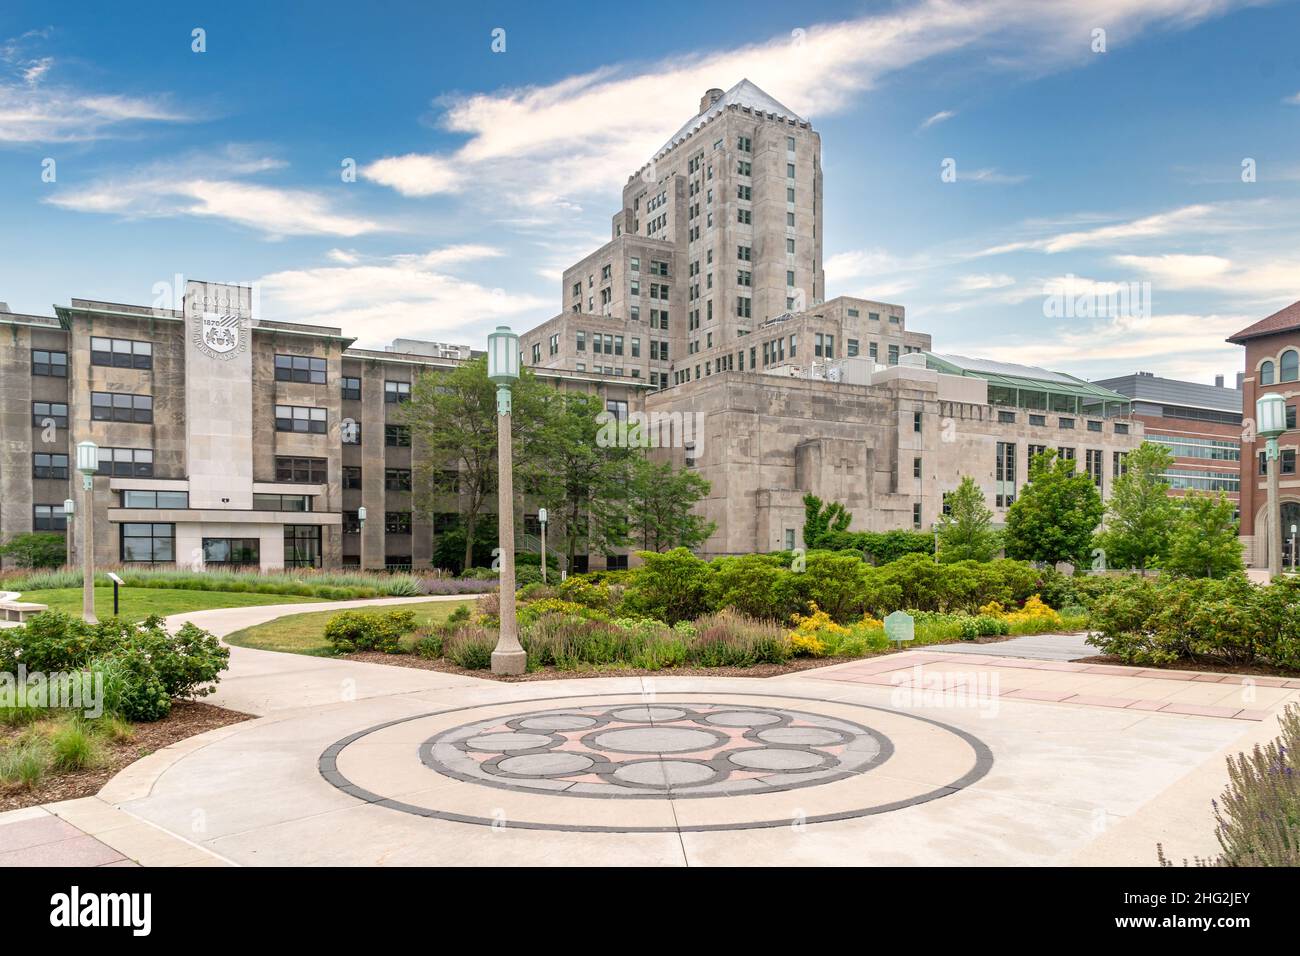 CHICAGO, IL, USA - JUNE 21, 2021: Campus Walkway on the campus of Loyola University Chicago. Stock Photo